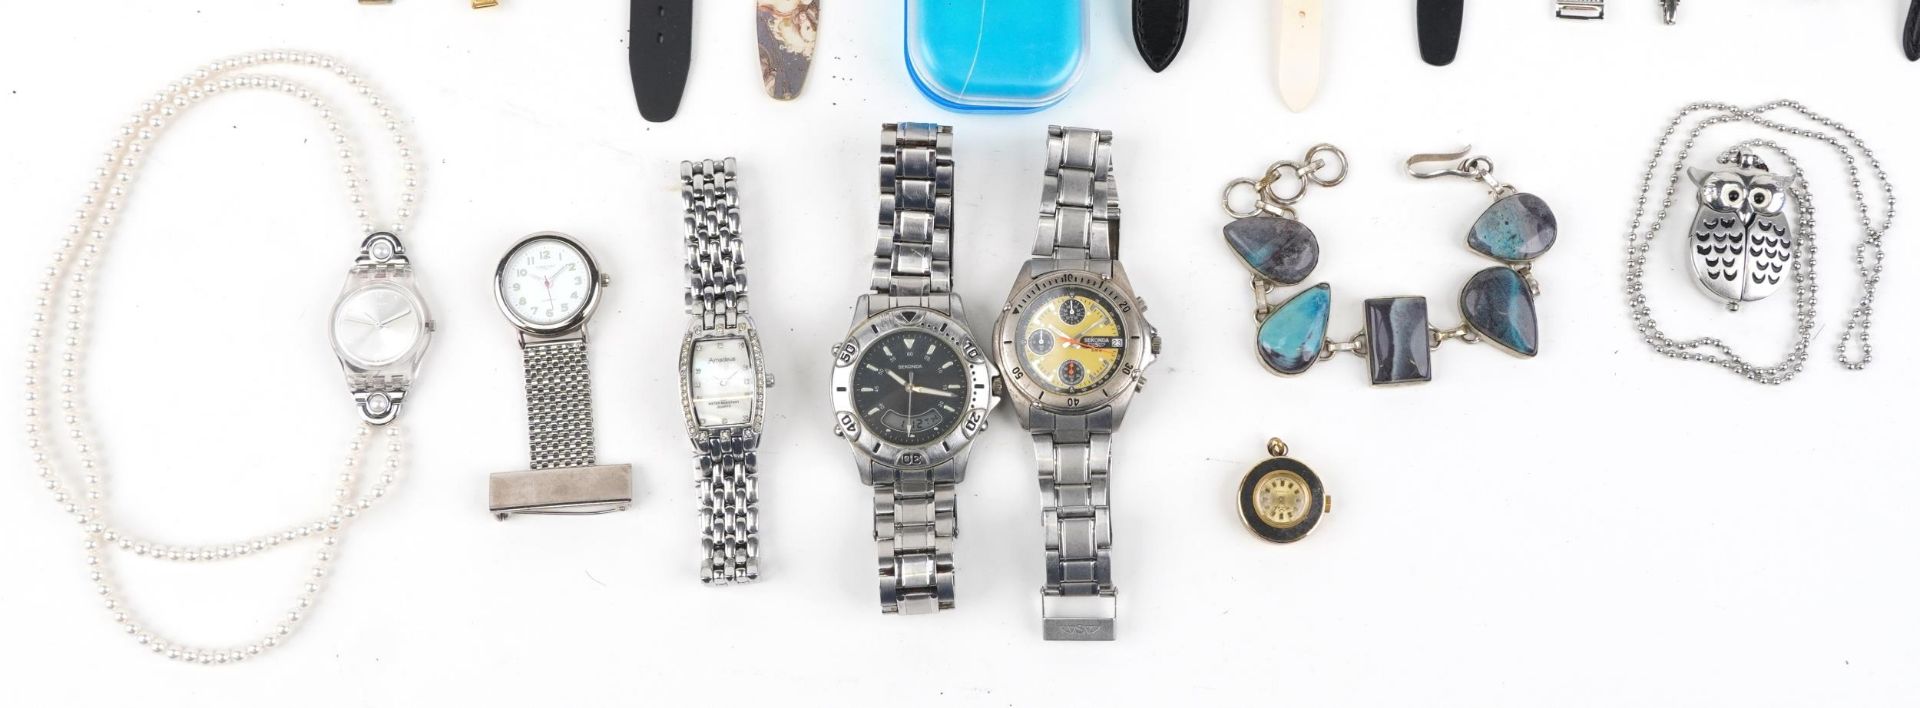 Vintage and later ladies and gentlemen's wristwatches and costume jewellery including Lorus, Swatch, - Image 4 of 4